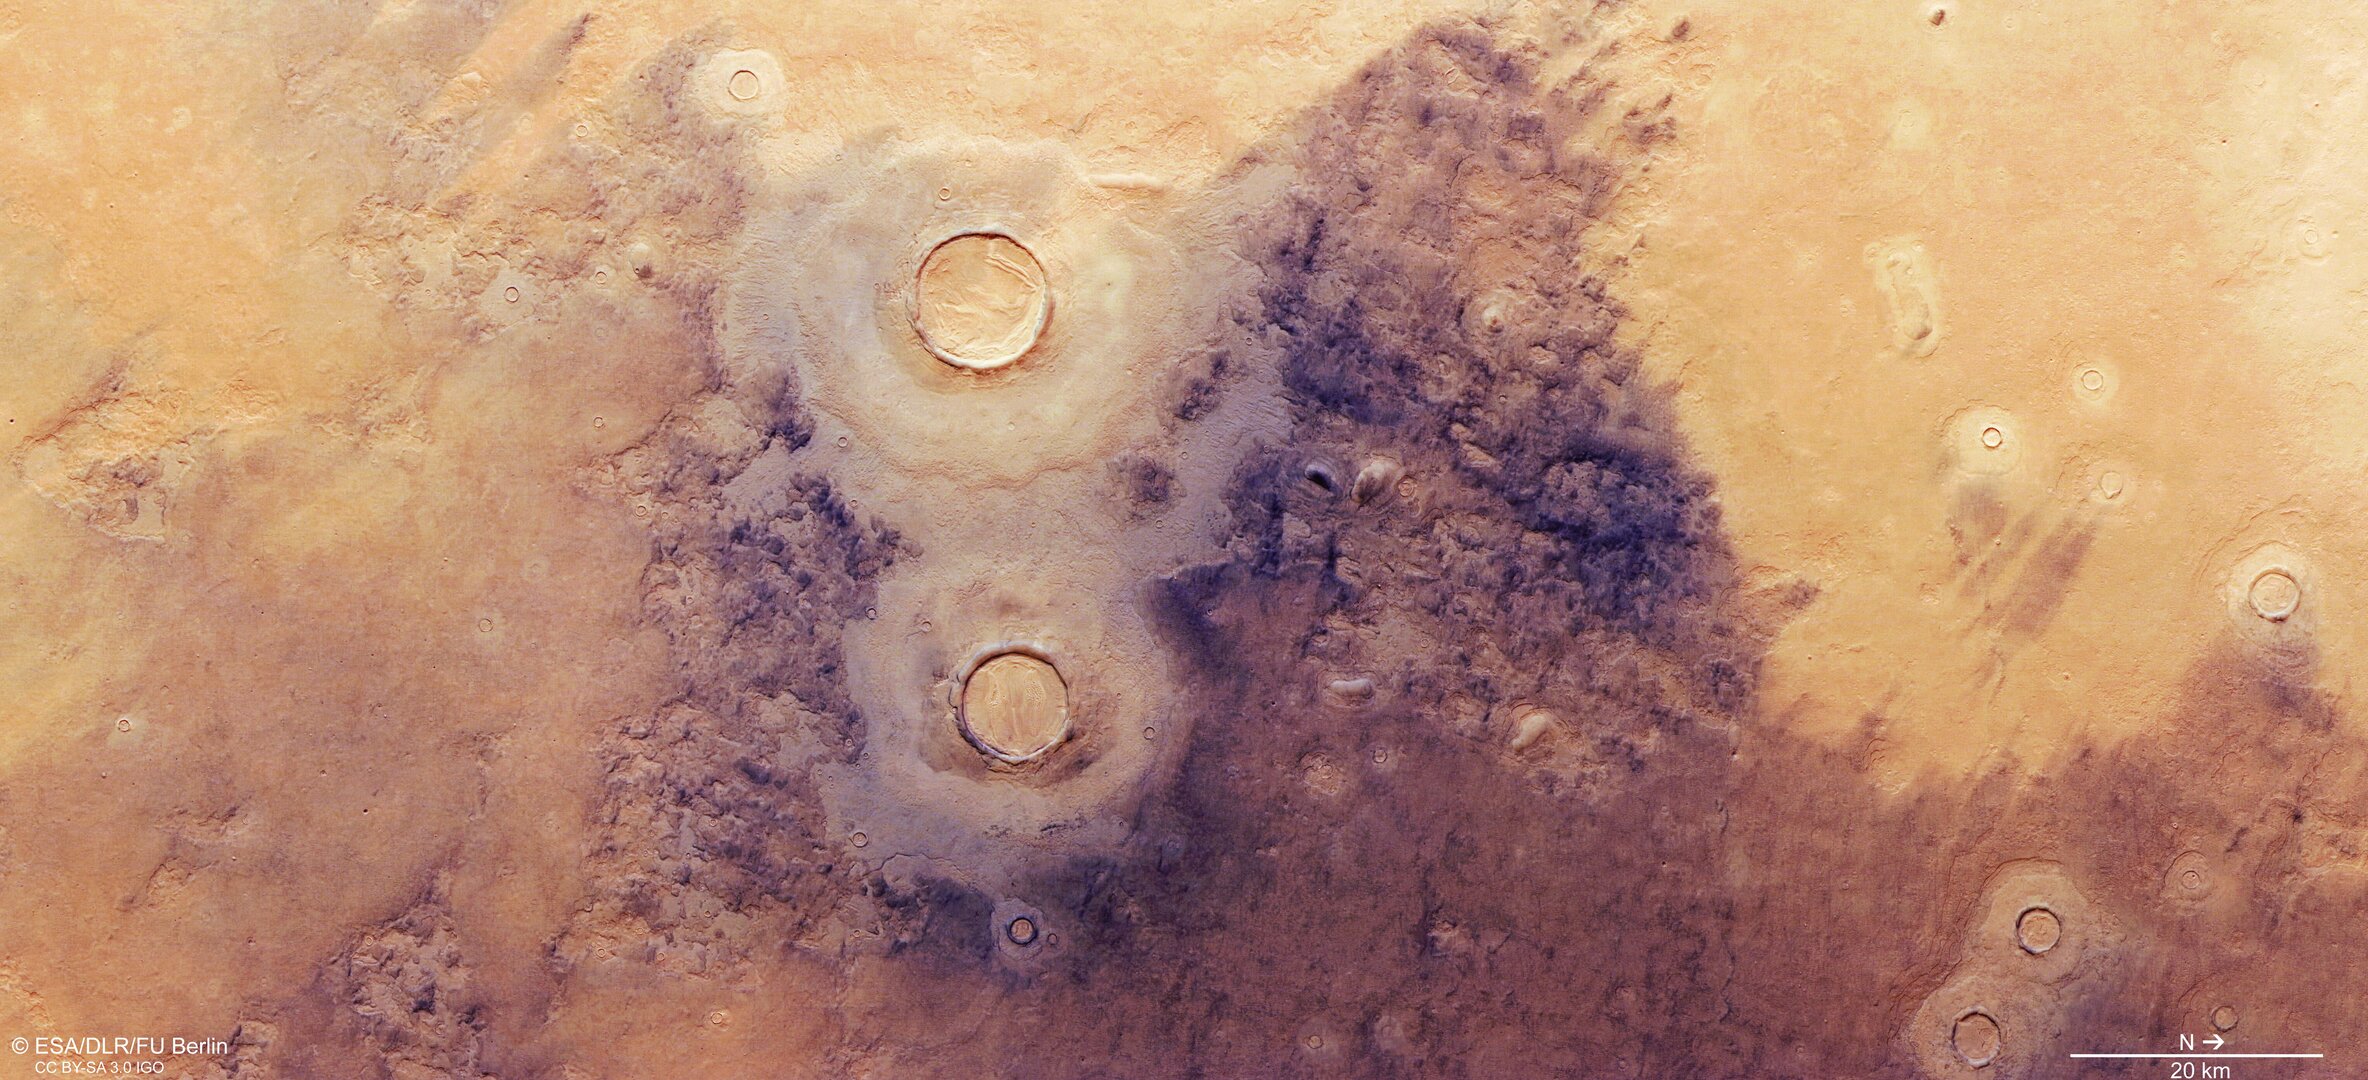 ESA's Mars Express uncovers fascinating ice-related features in Utopia region